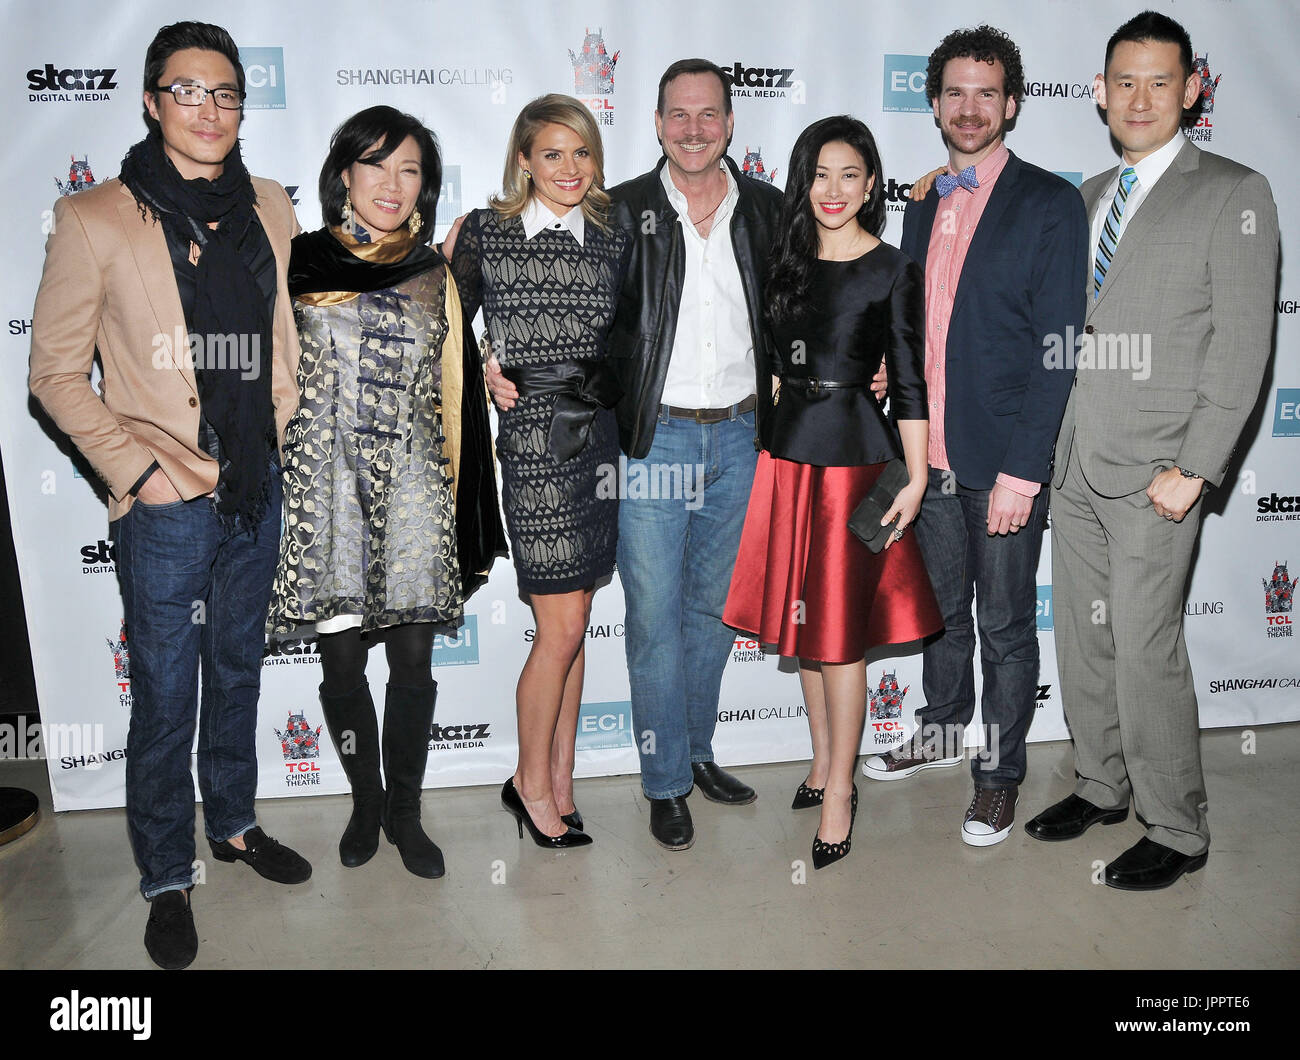 Daniel Henney, Producer Janet Yang, Eliza Coupe, Bill Paxton, Zhu Zhu, Sean Gallagher & Director Daniel Hsia at the 'Shanghai Calling' Los Angeles Premiere held at the TCL Chinese Theatre in Hollywood, CA.The event took place on Monday, Febuary 12, 2013. Photo by PRPP Pacific Rim Photo Press. Stock Photo